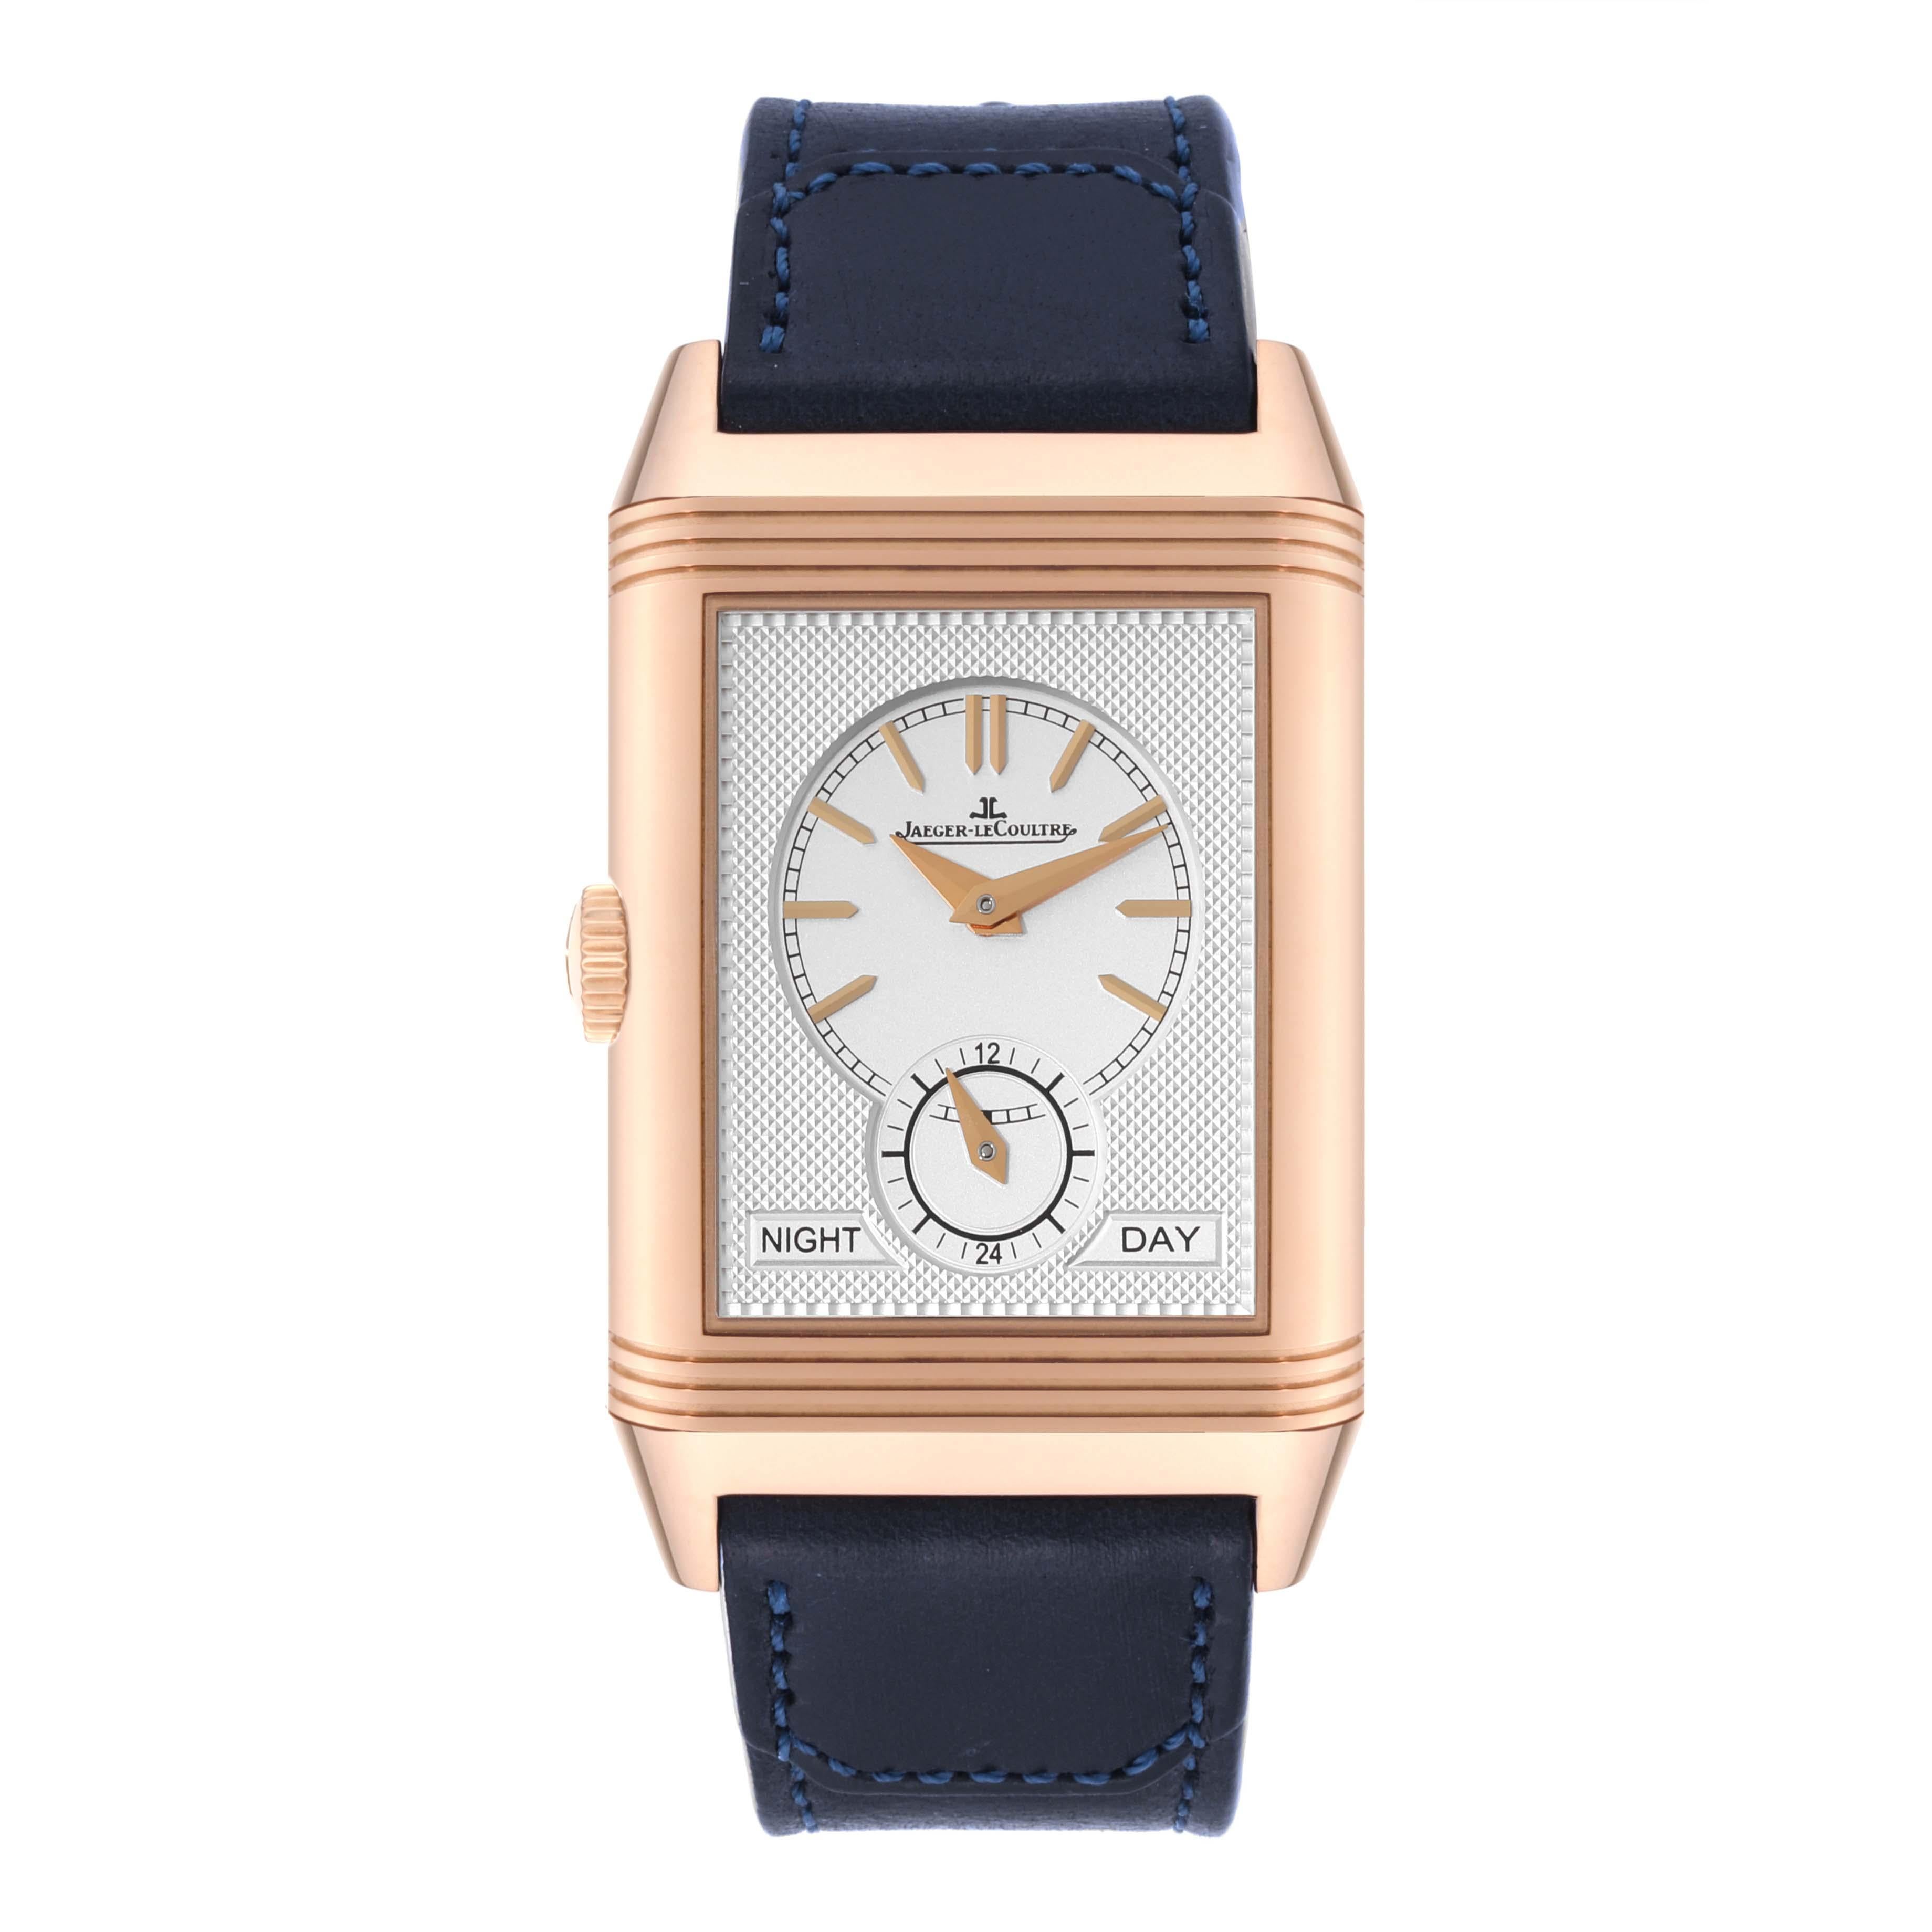 Jaeger LeCoultre Reverso Rose Gold Fagliano Limited Edition Mens  Watch 215.2.D4 Q398258J Box Card. Manual winding movement. 18k rose gold 47mm X 28.3 mm rectangular case rotating within its back plate. 18k rose gold reeded bezel. Scratch resistant